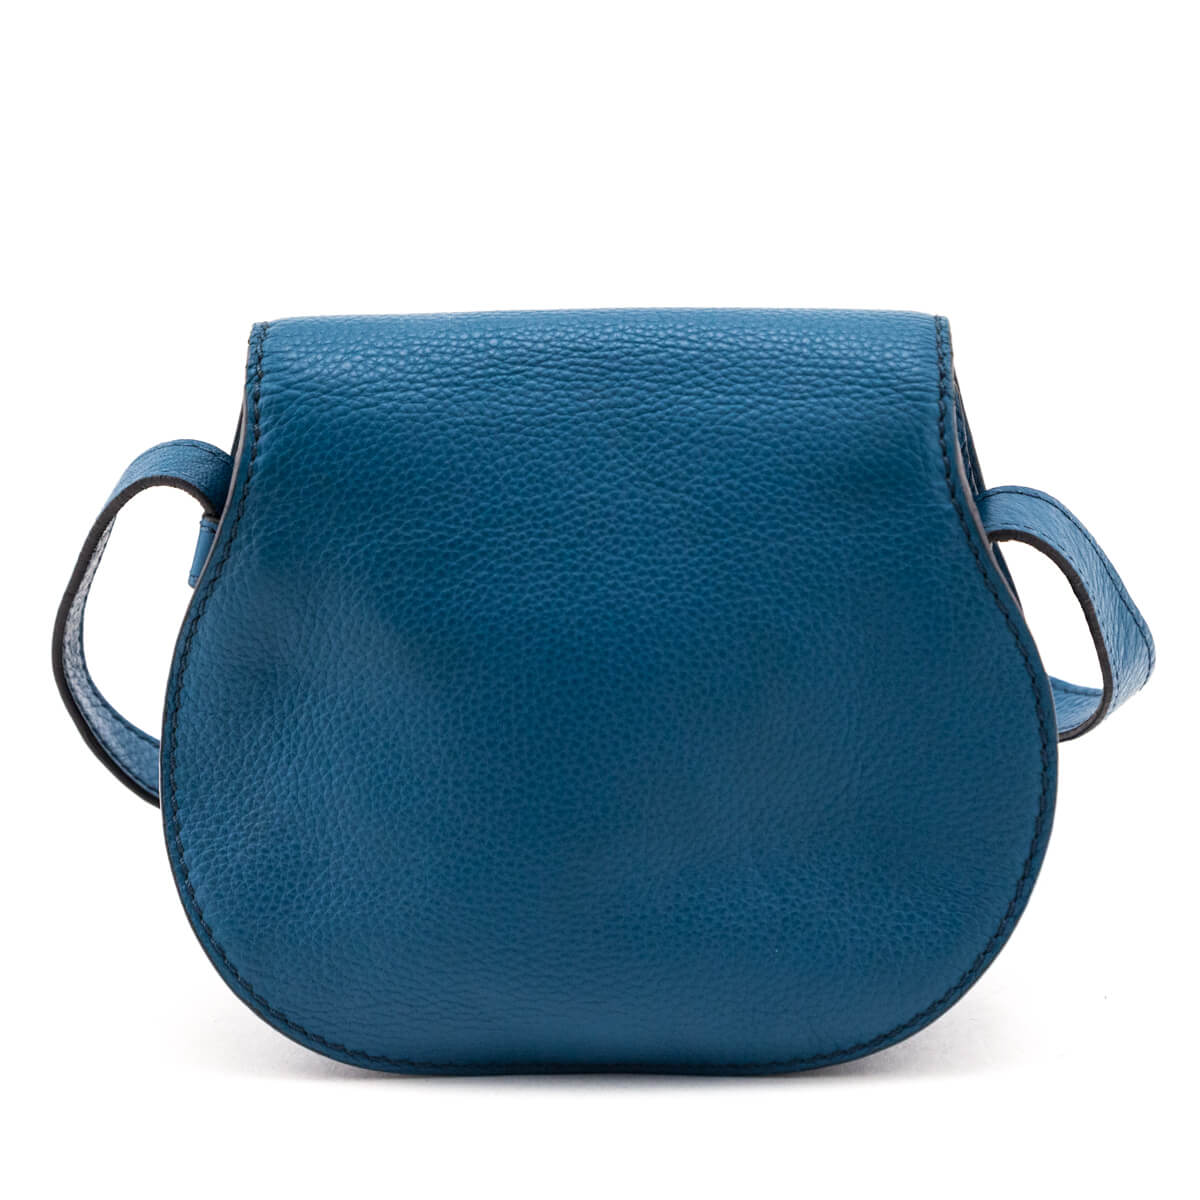 Chloe Teal Grained Calfskin Small Marcie Saddle Crossbody - Love that Bag etc - Preowned Authentic Designer Handbags & Preloved Fashions